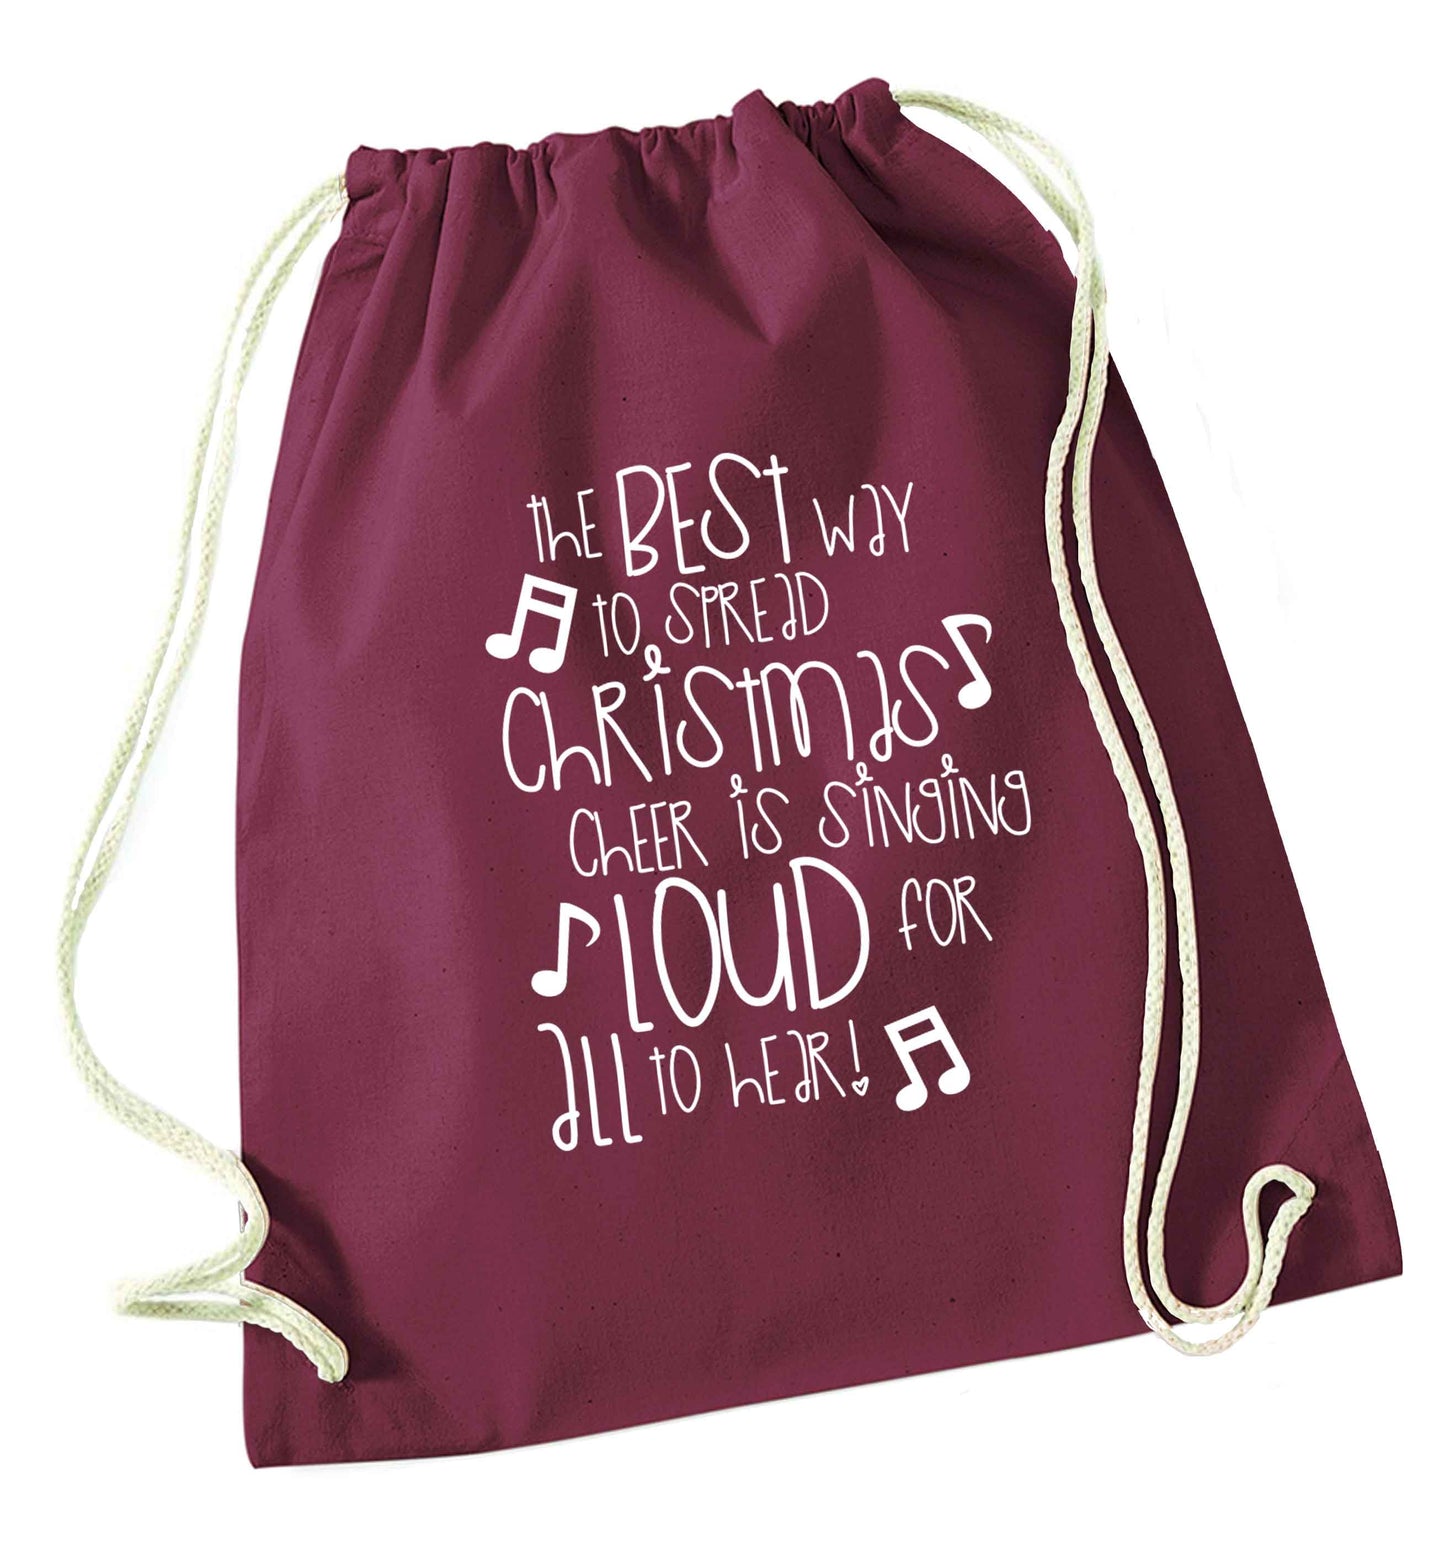 The best way to spread Christmas cheer is singing loud for all to hear maroon drawstring bag